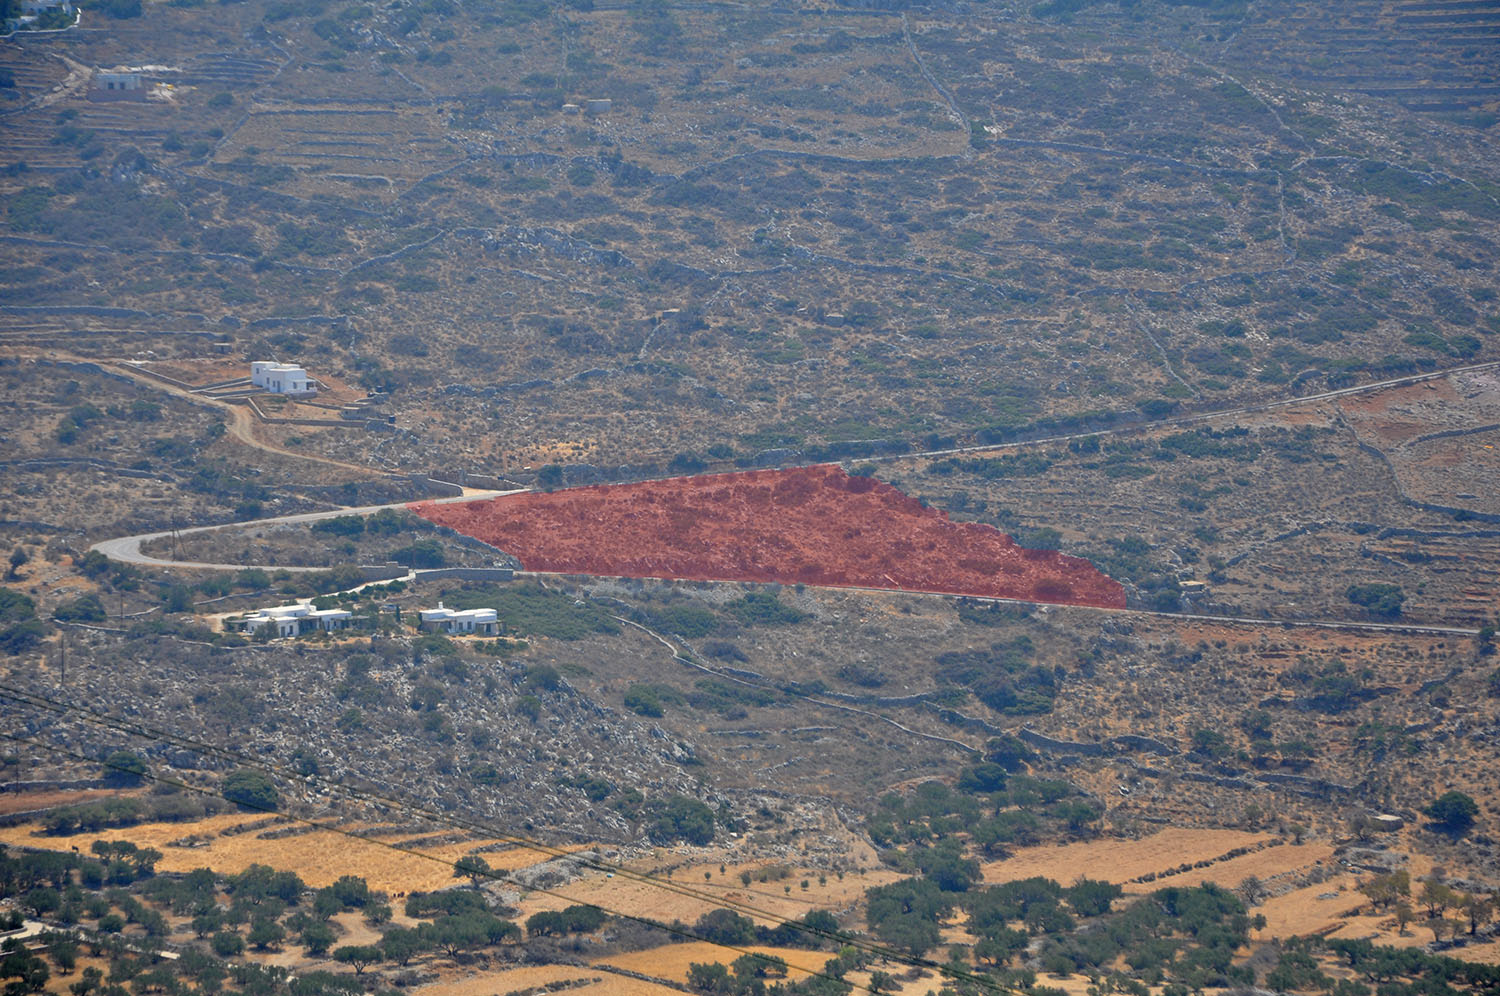 View over the land, see red marking